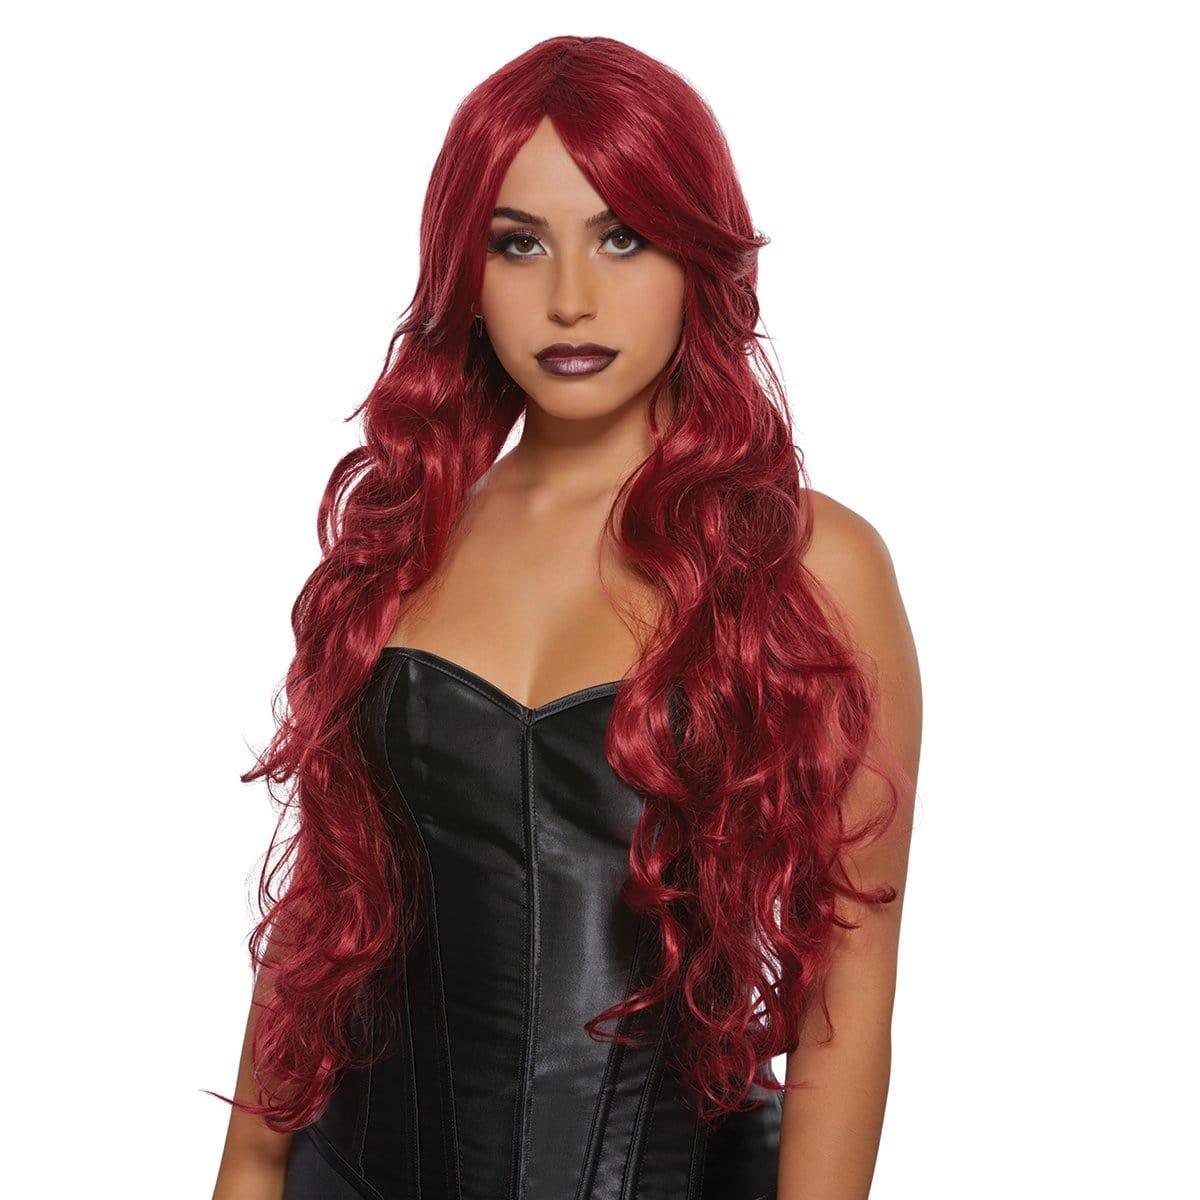 Buy Costume Accessories Flirty burgundy Diva wig for women sold at Party Expert